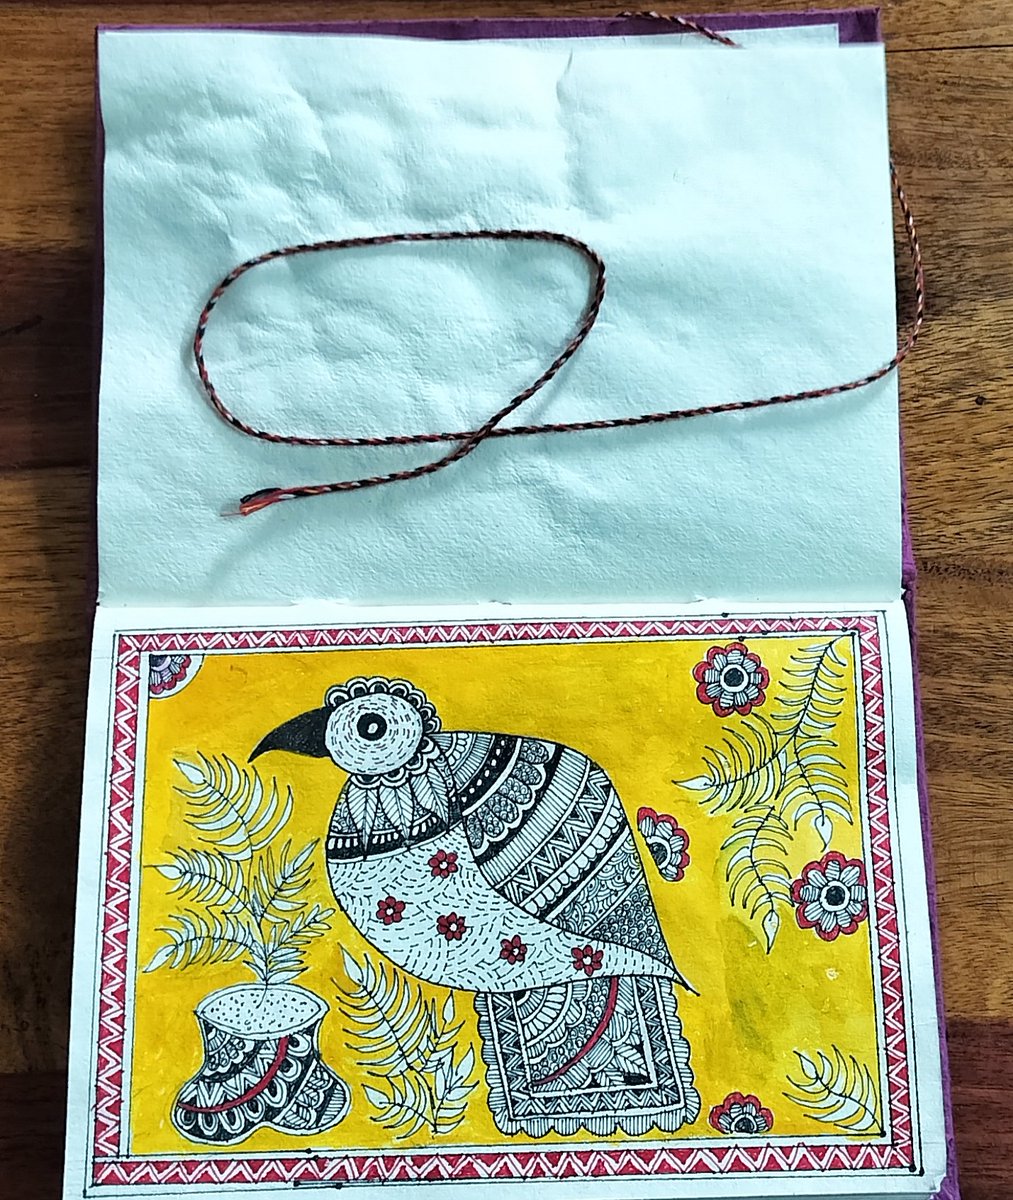 Birds , art and birds in art is my kind of therapy. #art #arttherapy #artdiary #madhubani #MorningVibes